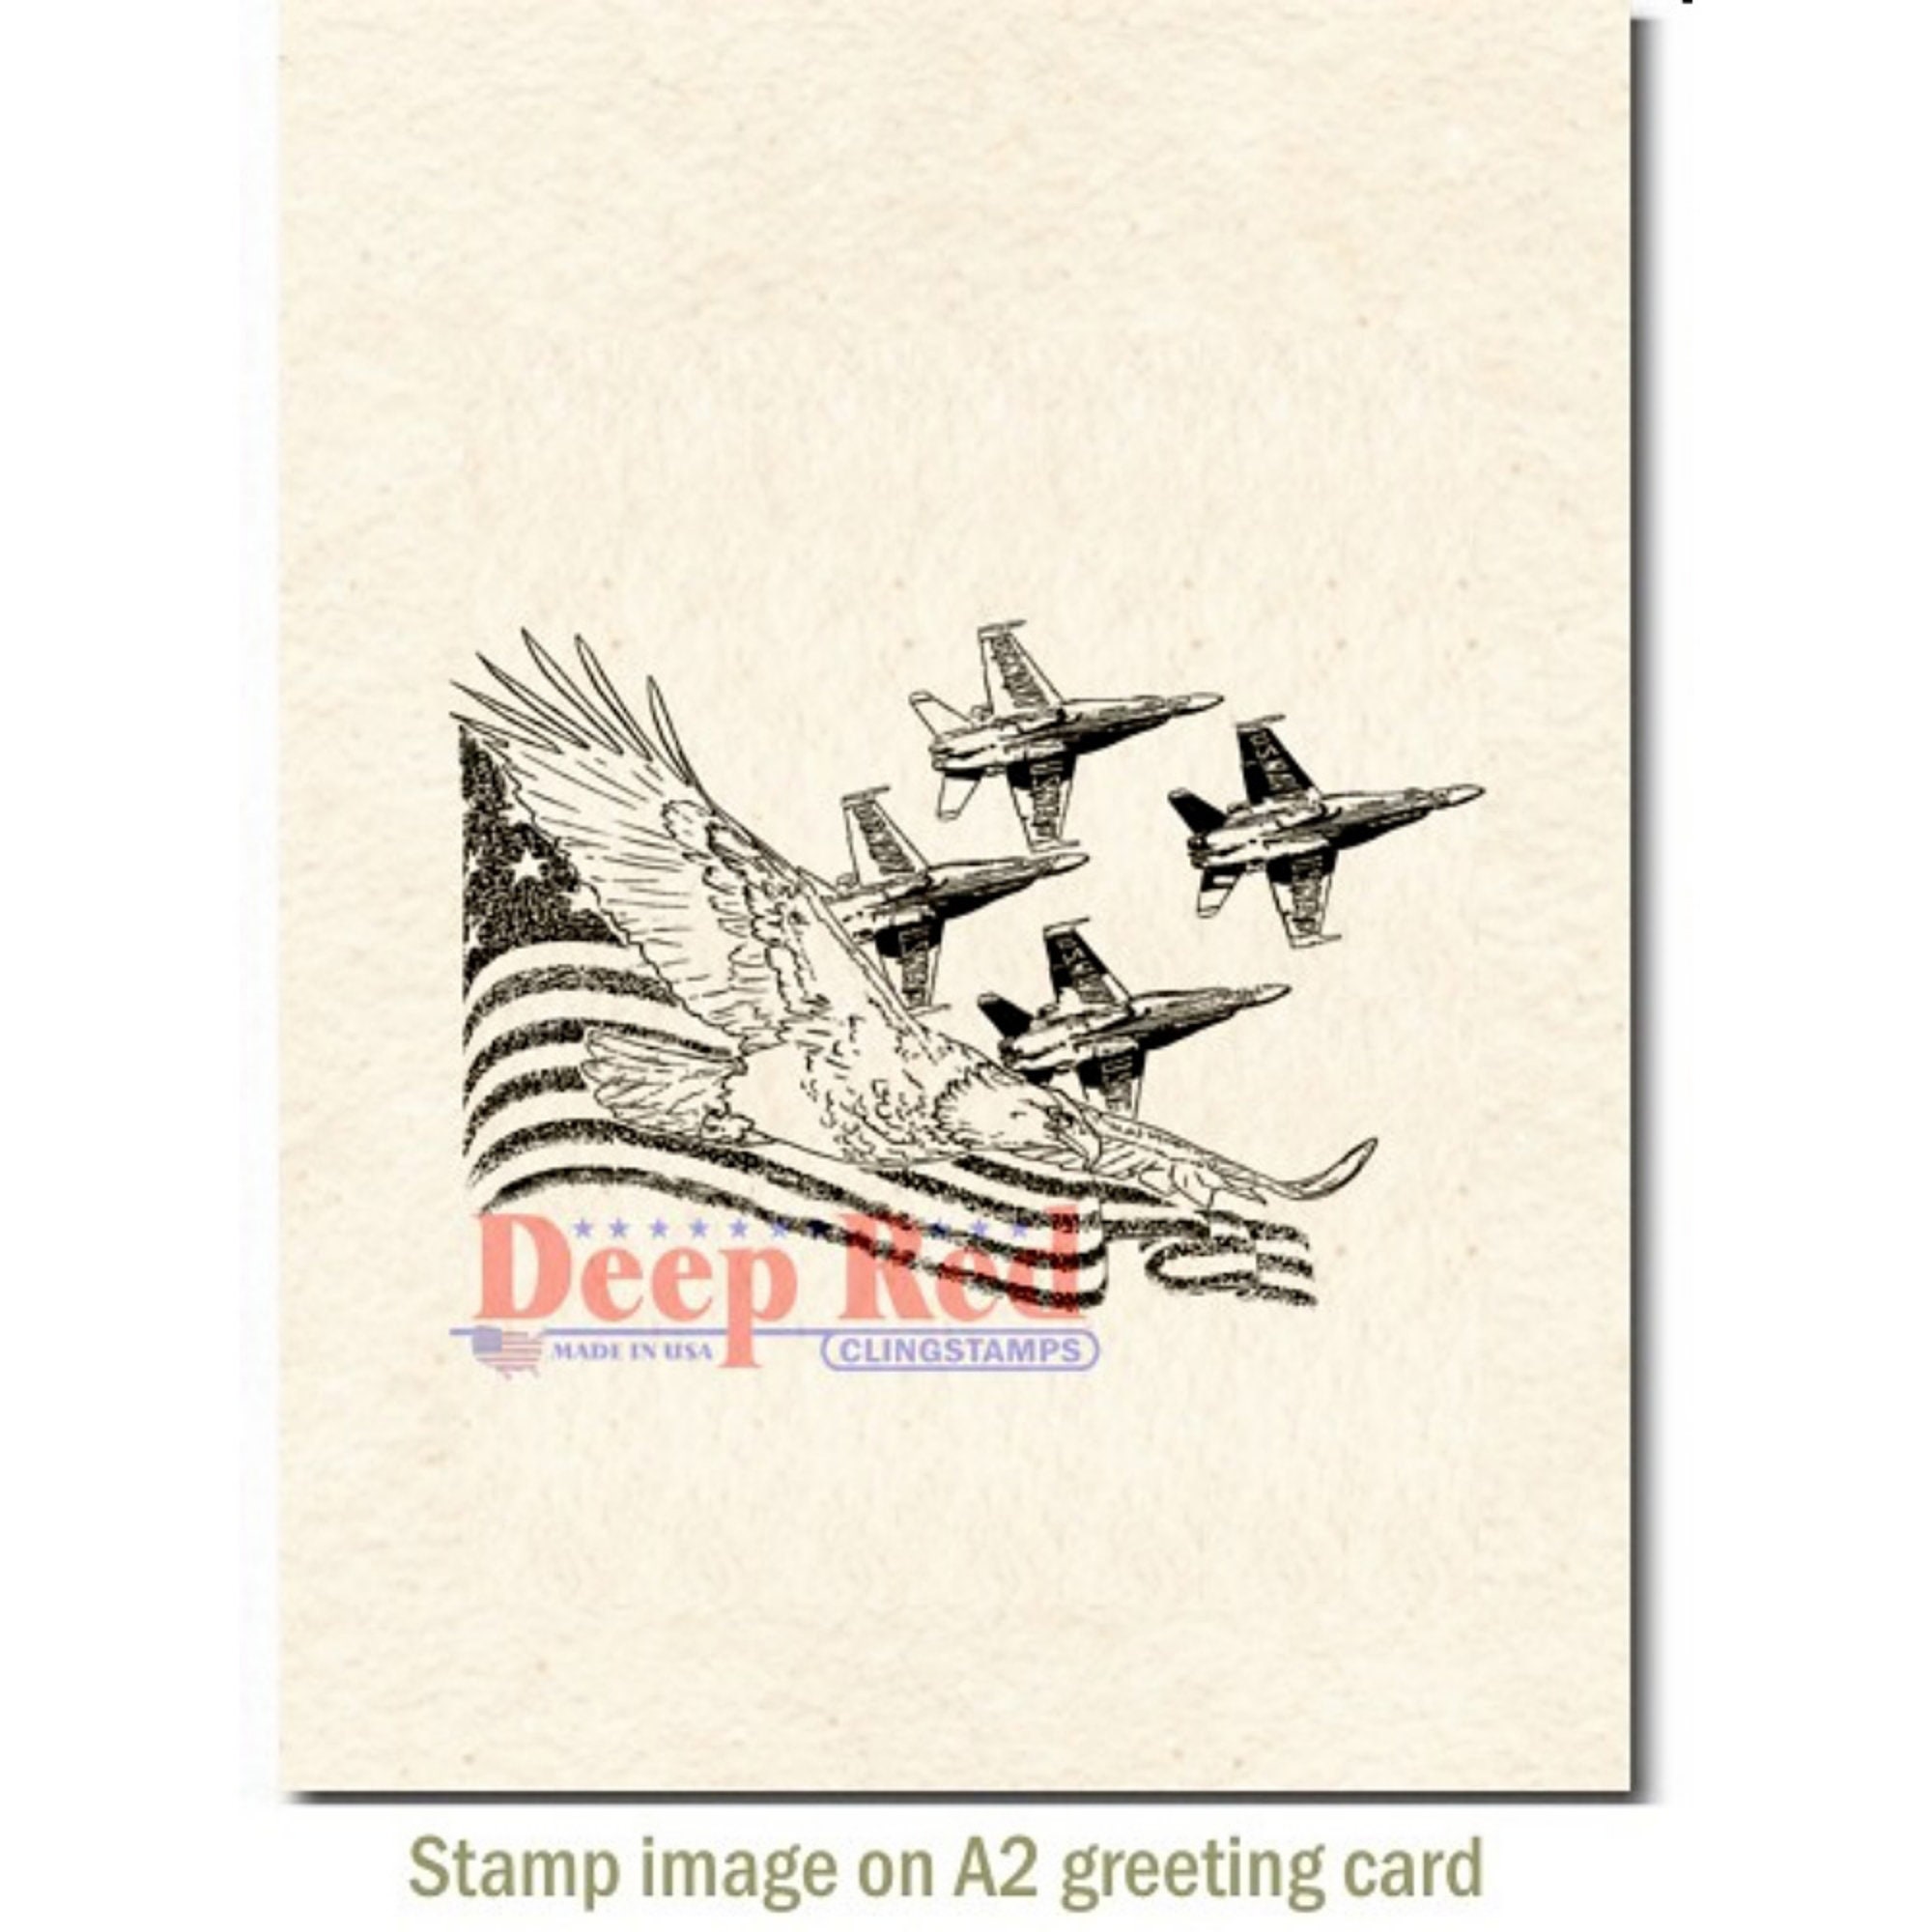 Air Mail Postage Rubber Cling Stamp